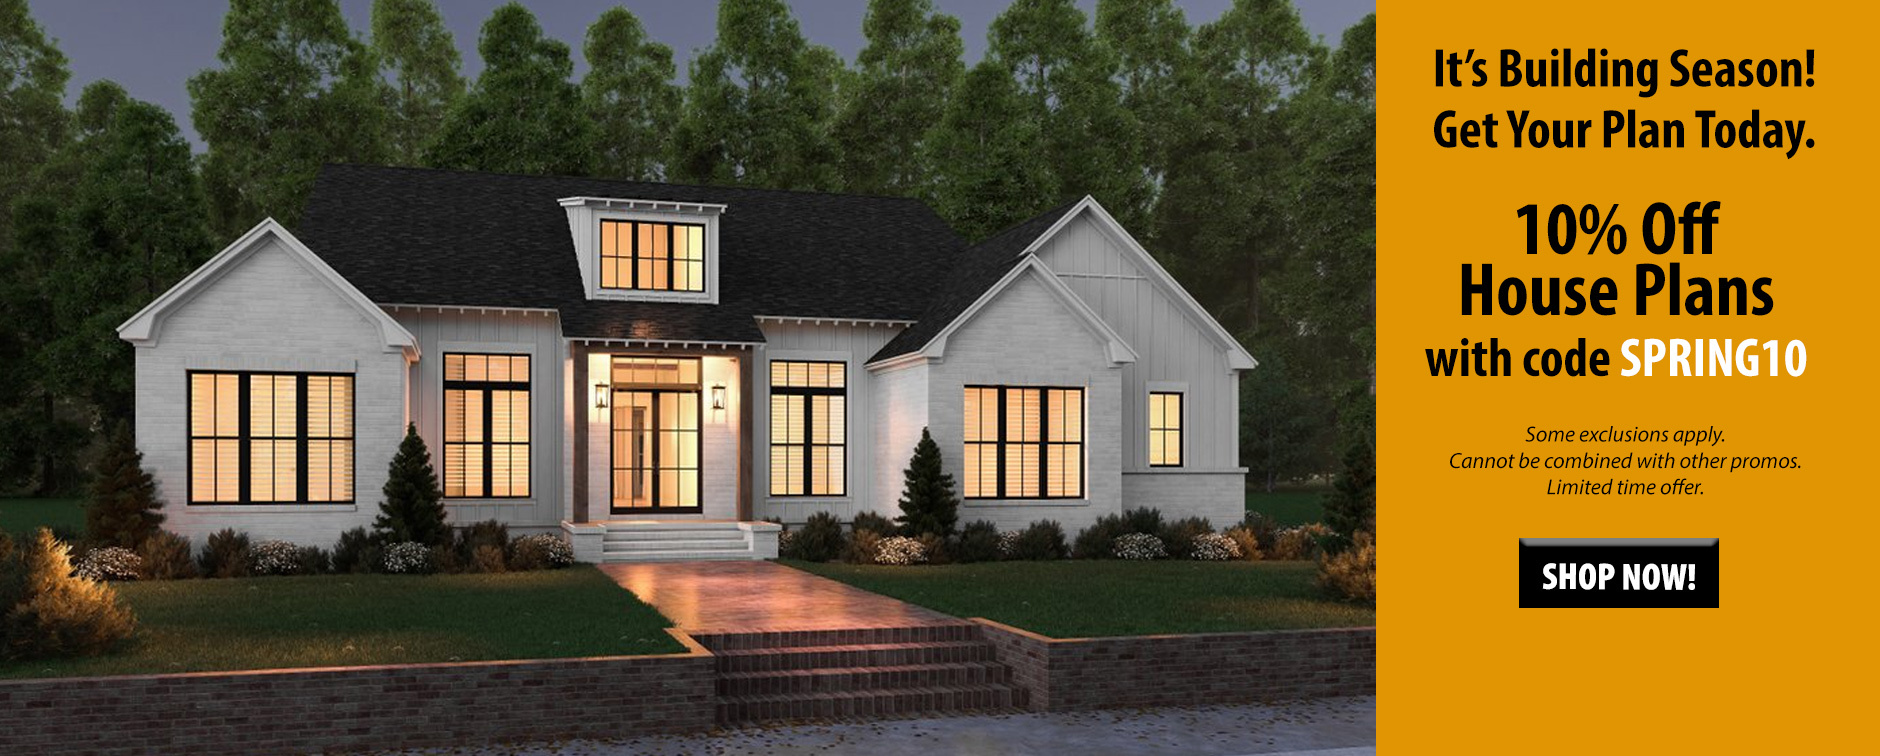 Enjoy 10% Off Thousands of House Plans. Use Code SPRING10.